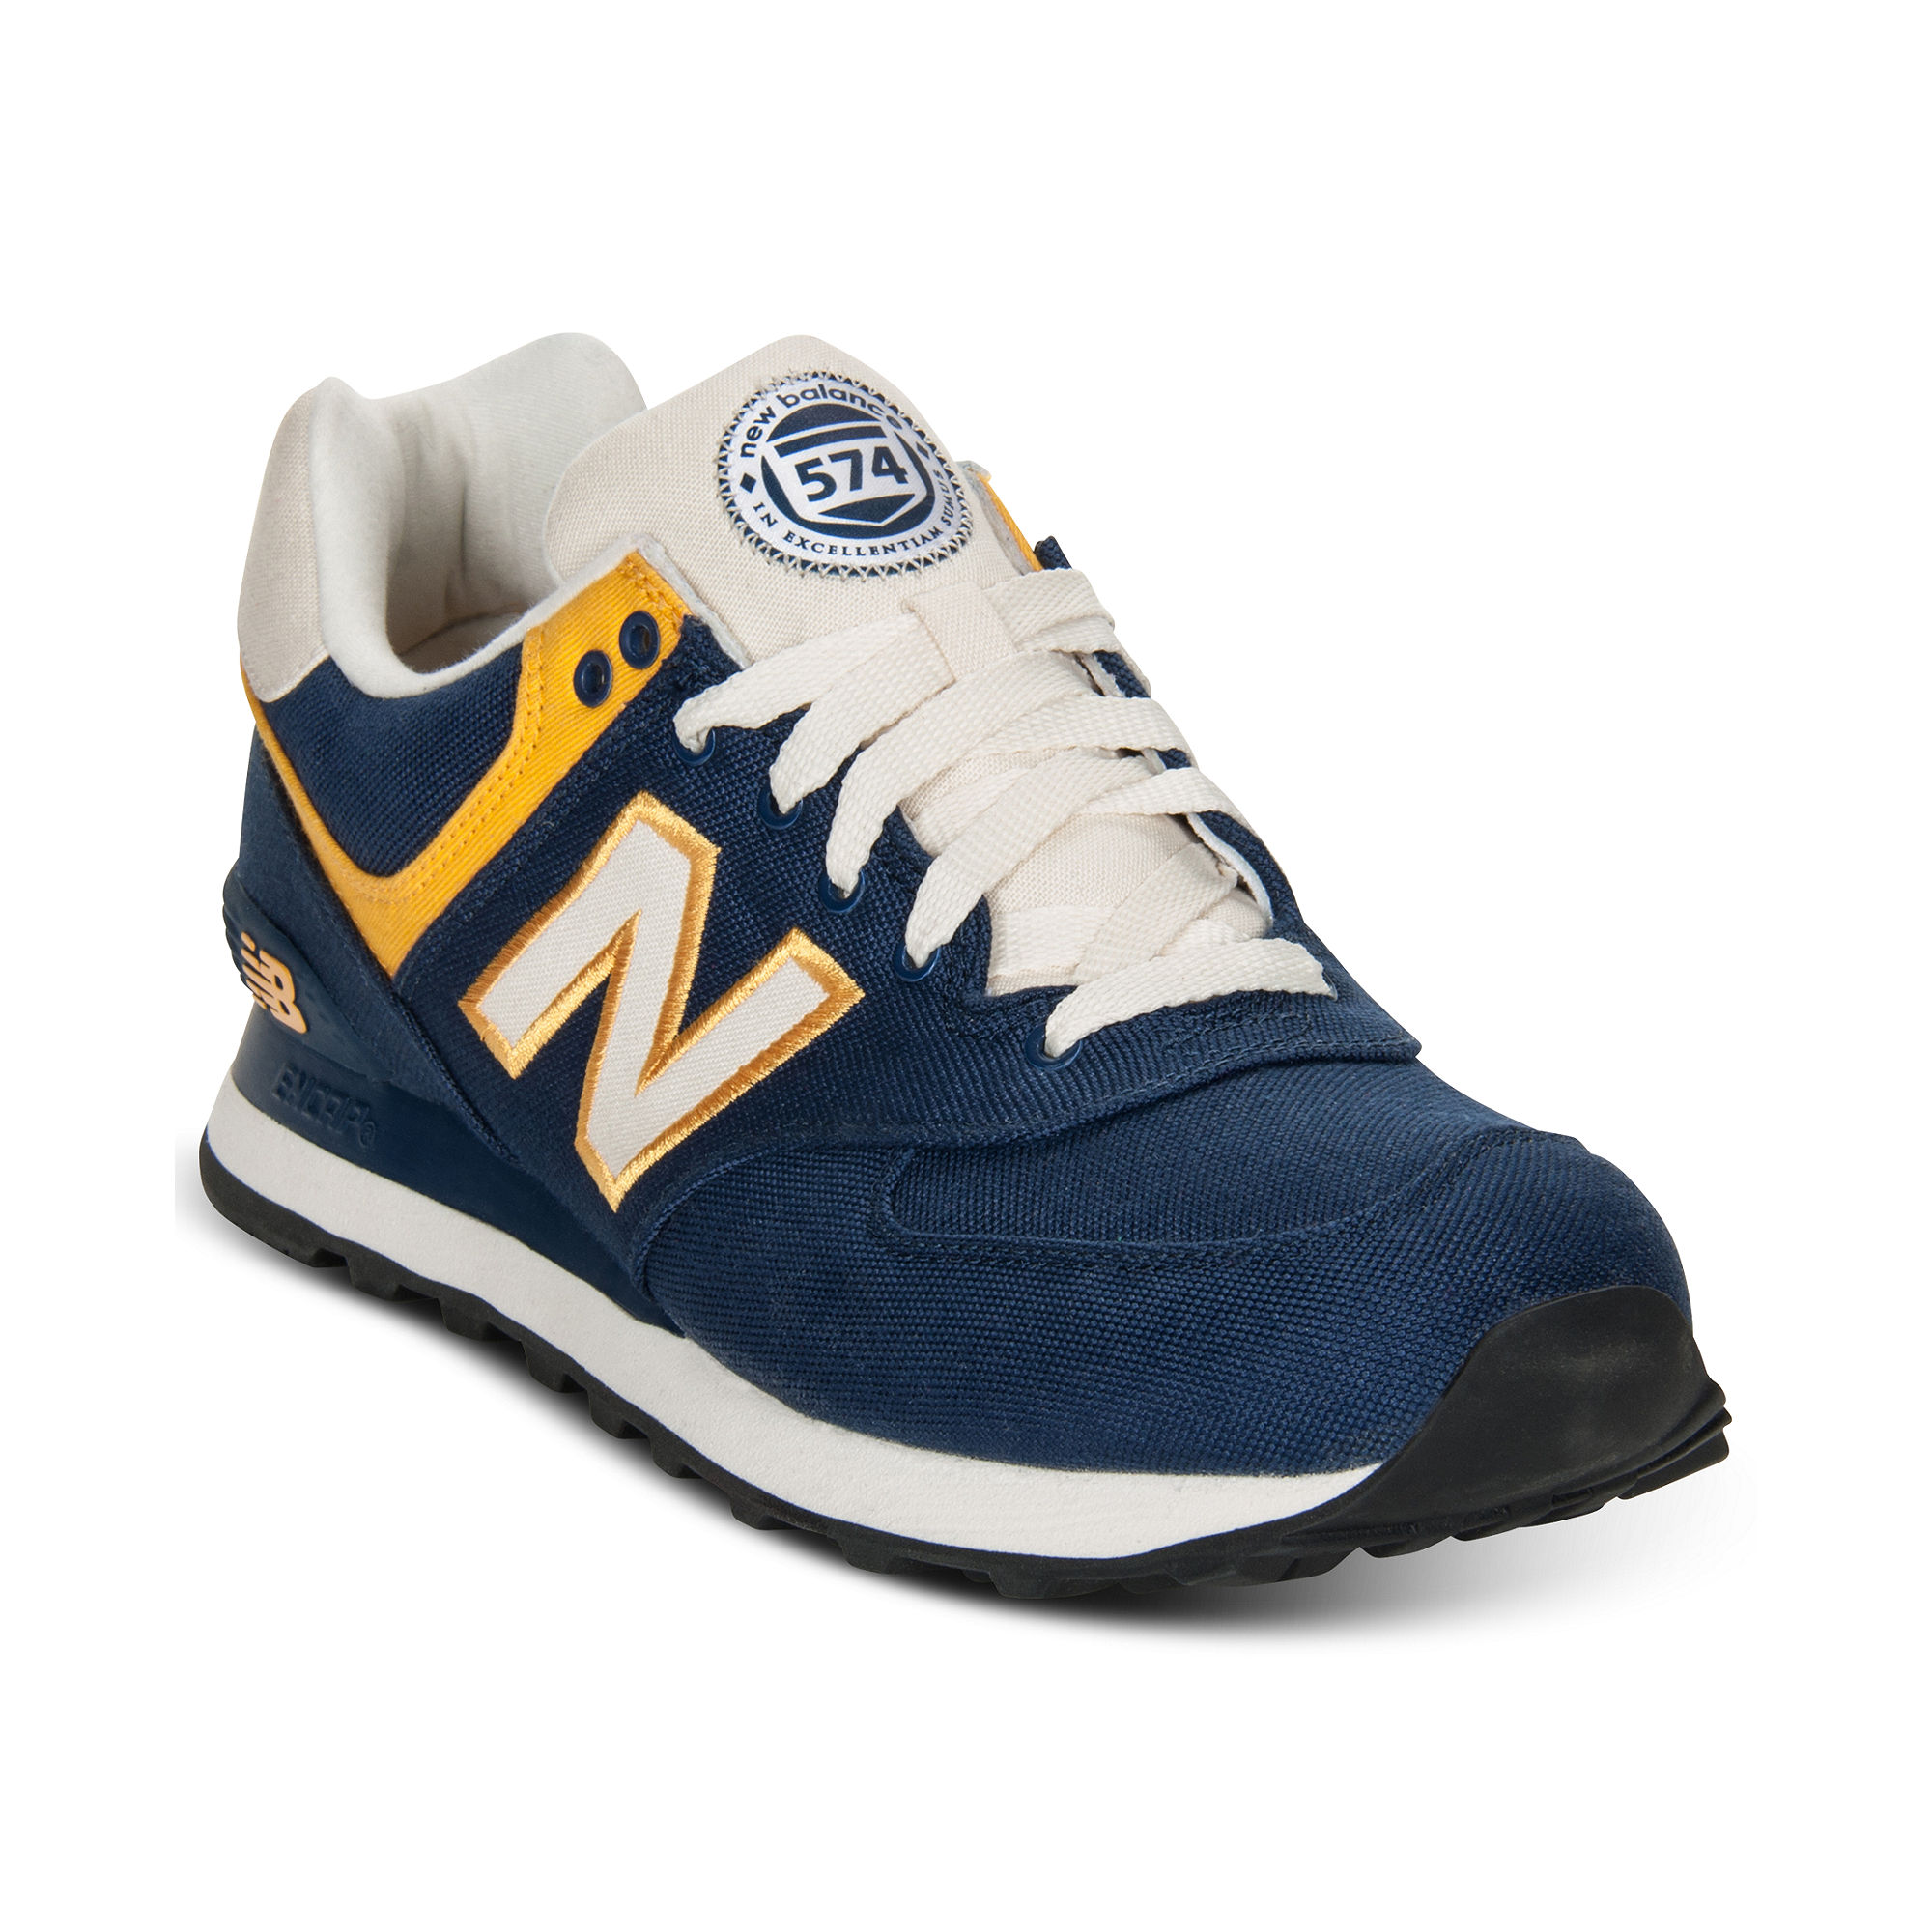 Lyst - New Balance 574 Sneakers in Blue for Men